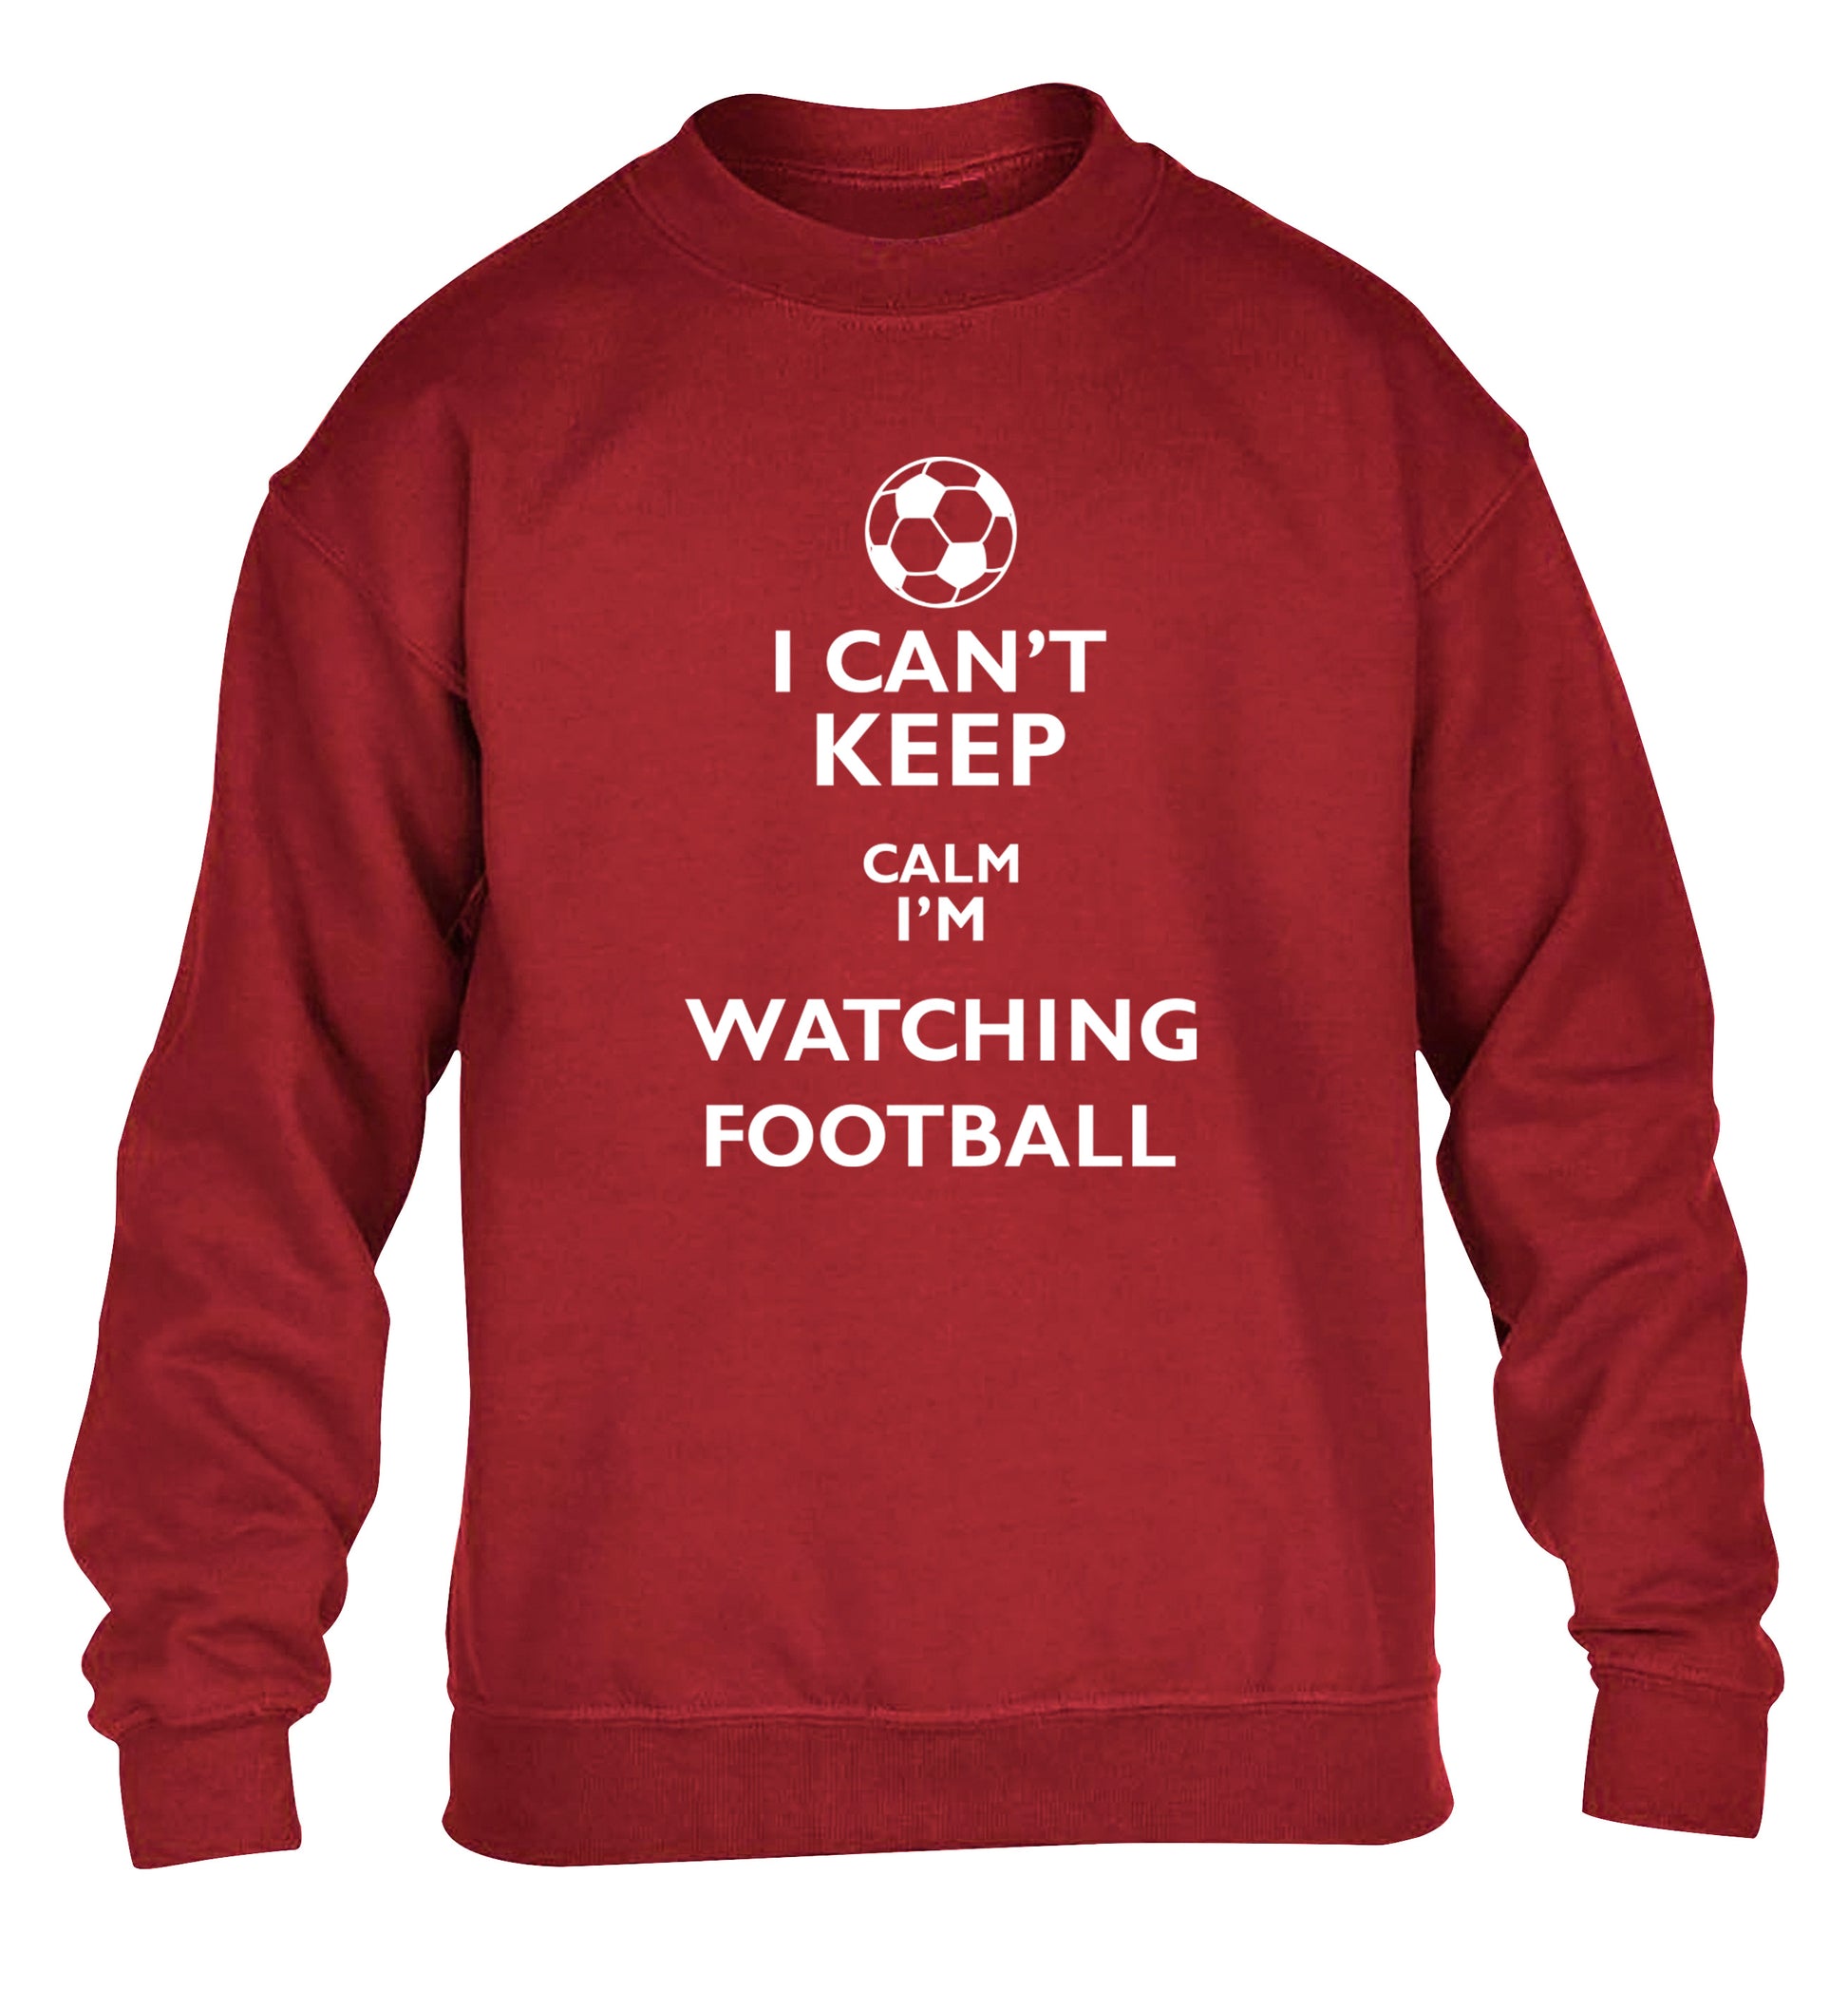 I can't keep calm I'm watching the football children's grey sweater 12-14 Years